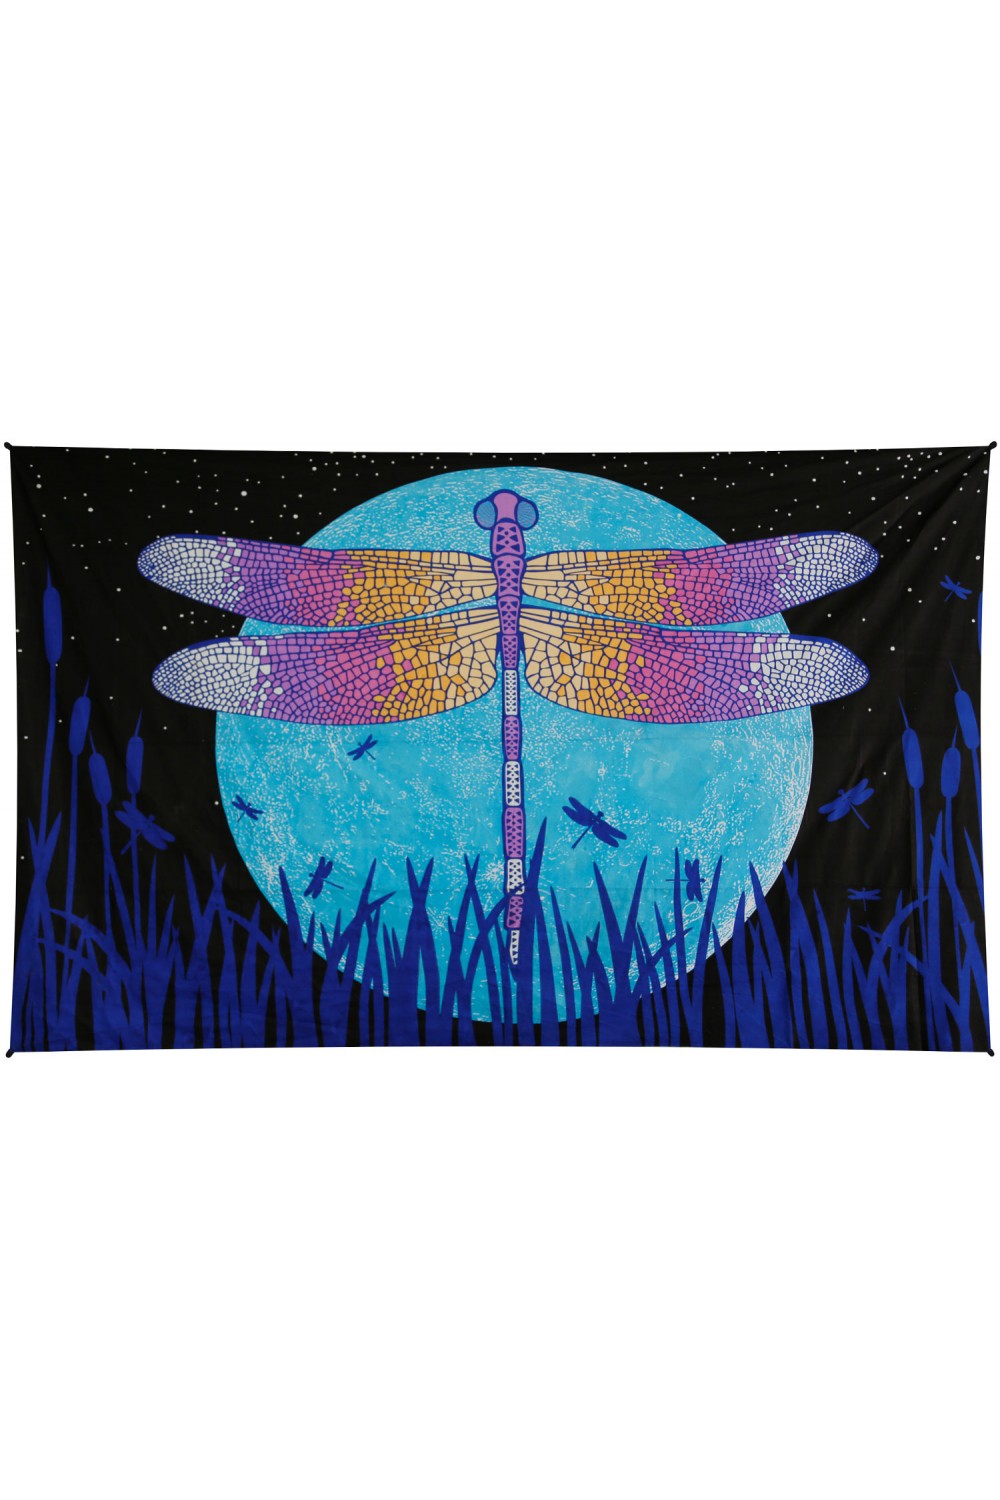 3D Glow in The Dark Dragonfly Moon Tapestry - eDeadShop